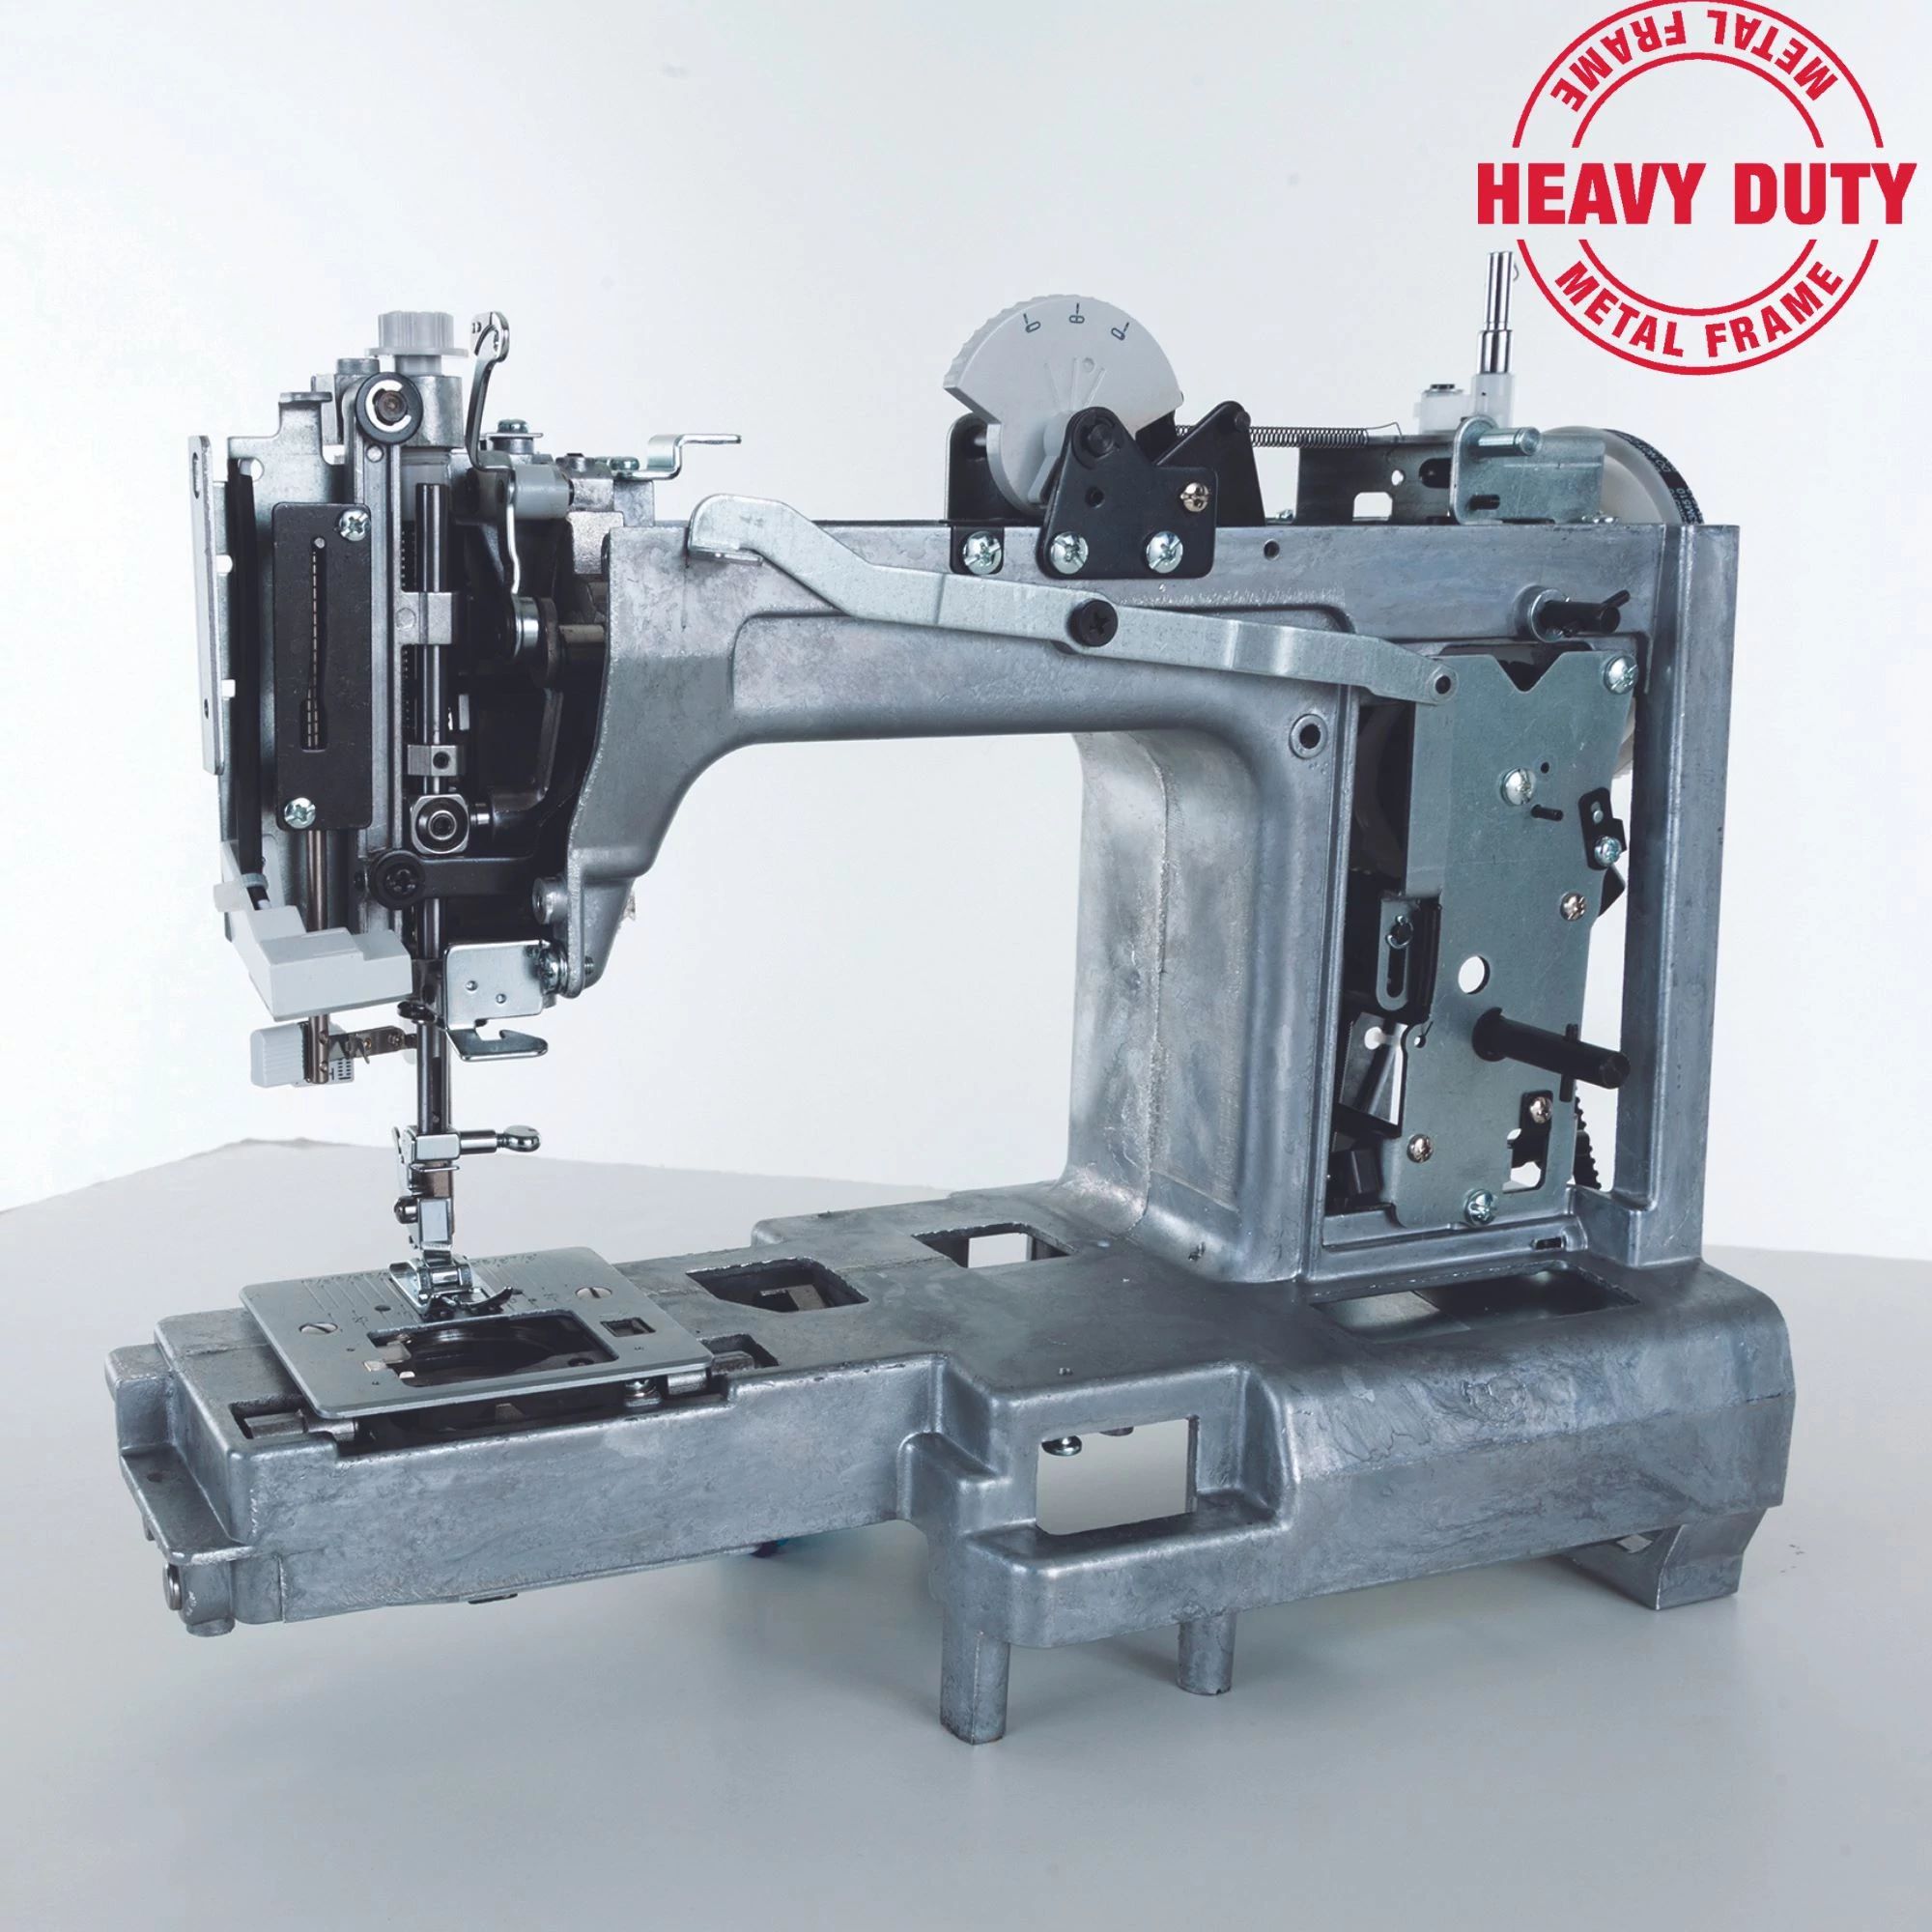 Heavy Duty 4432 Sewing Machine Black Special Edition